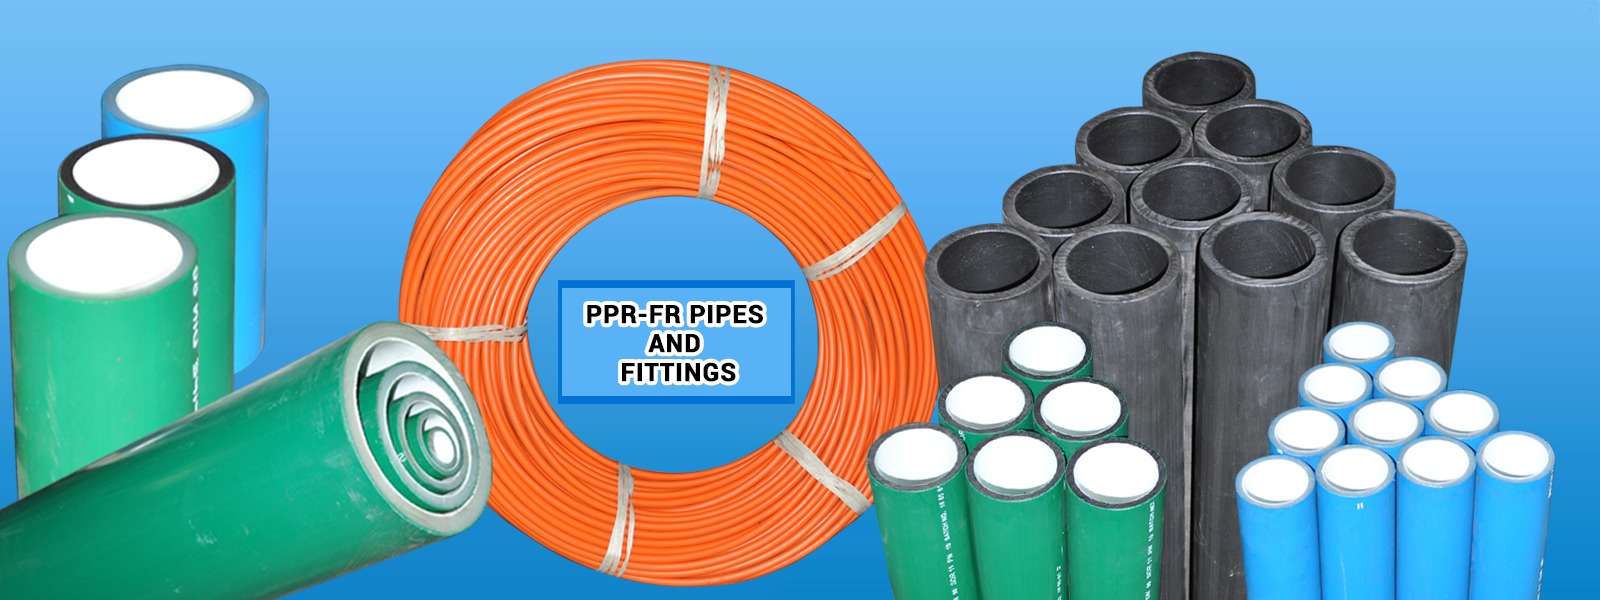 HDPE pipes and fittings manufacturer